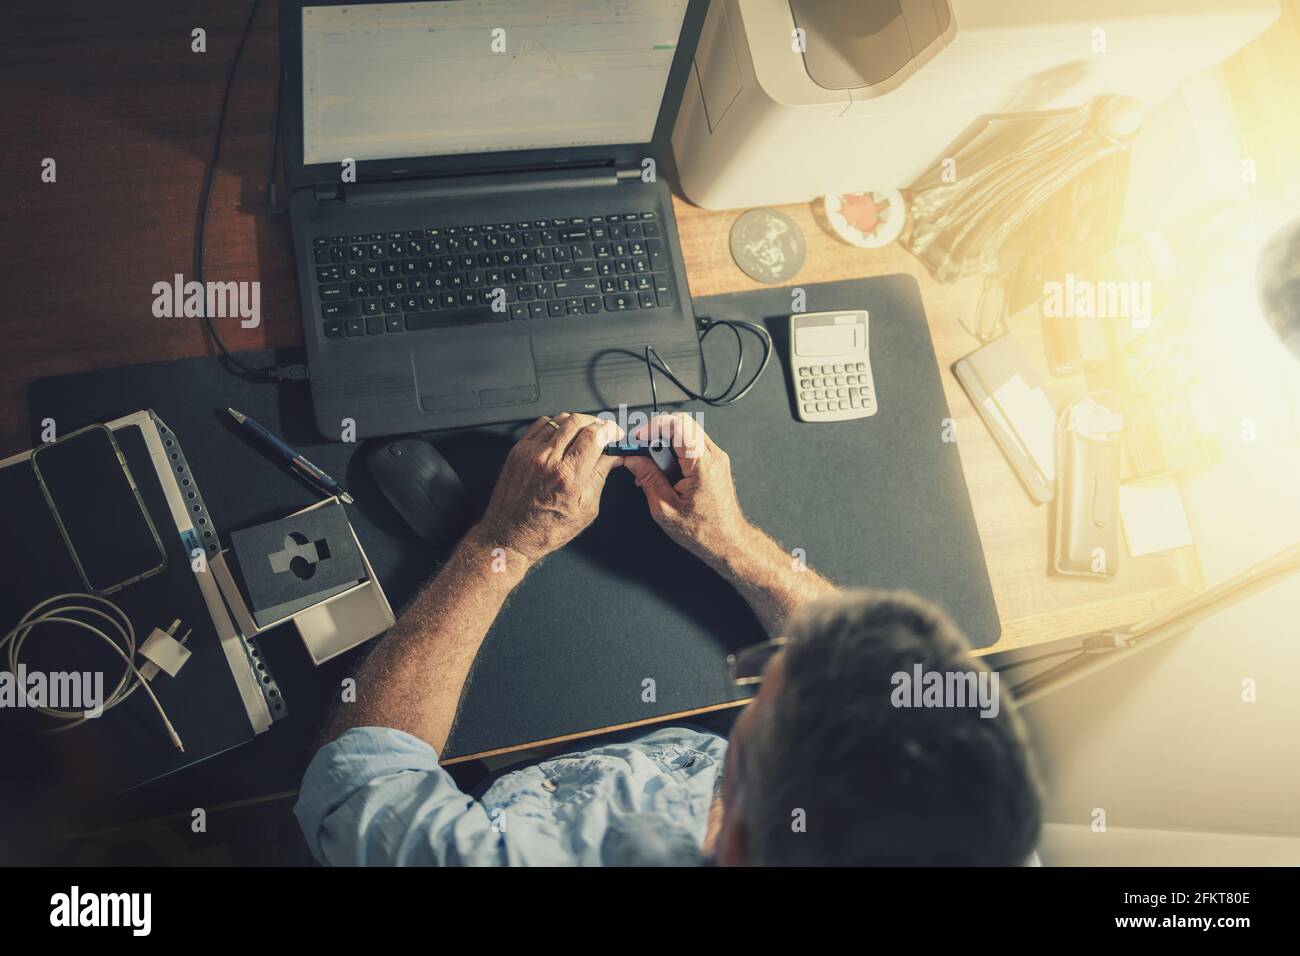 A senior man sitting at a desk in front of a laptop computer Stock Photo